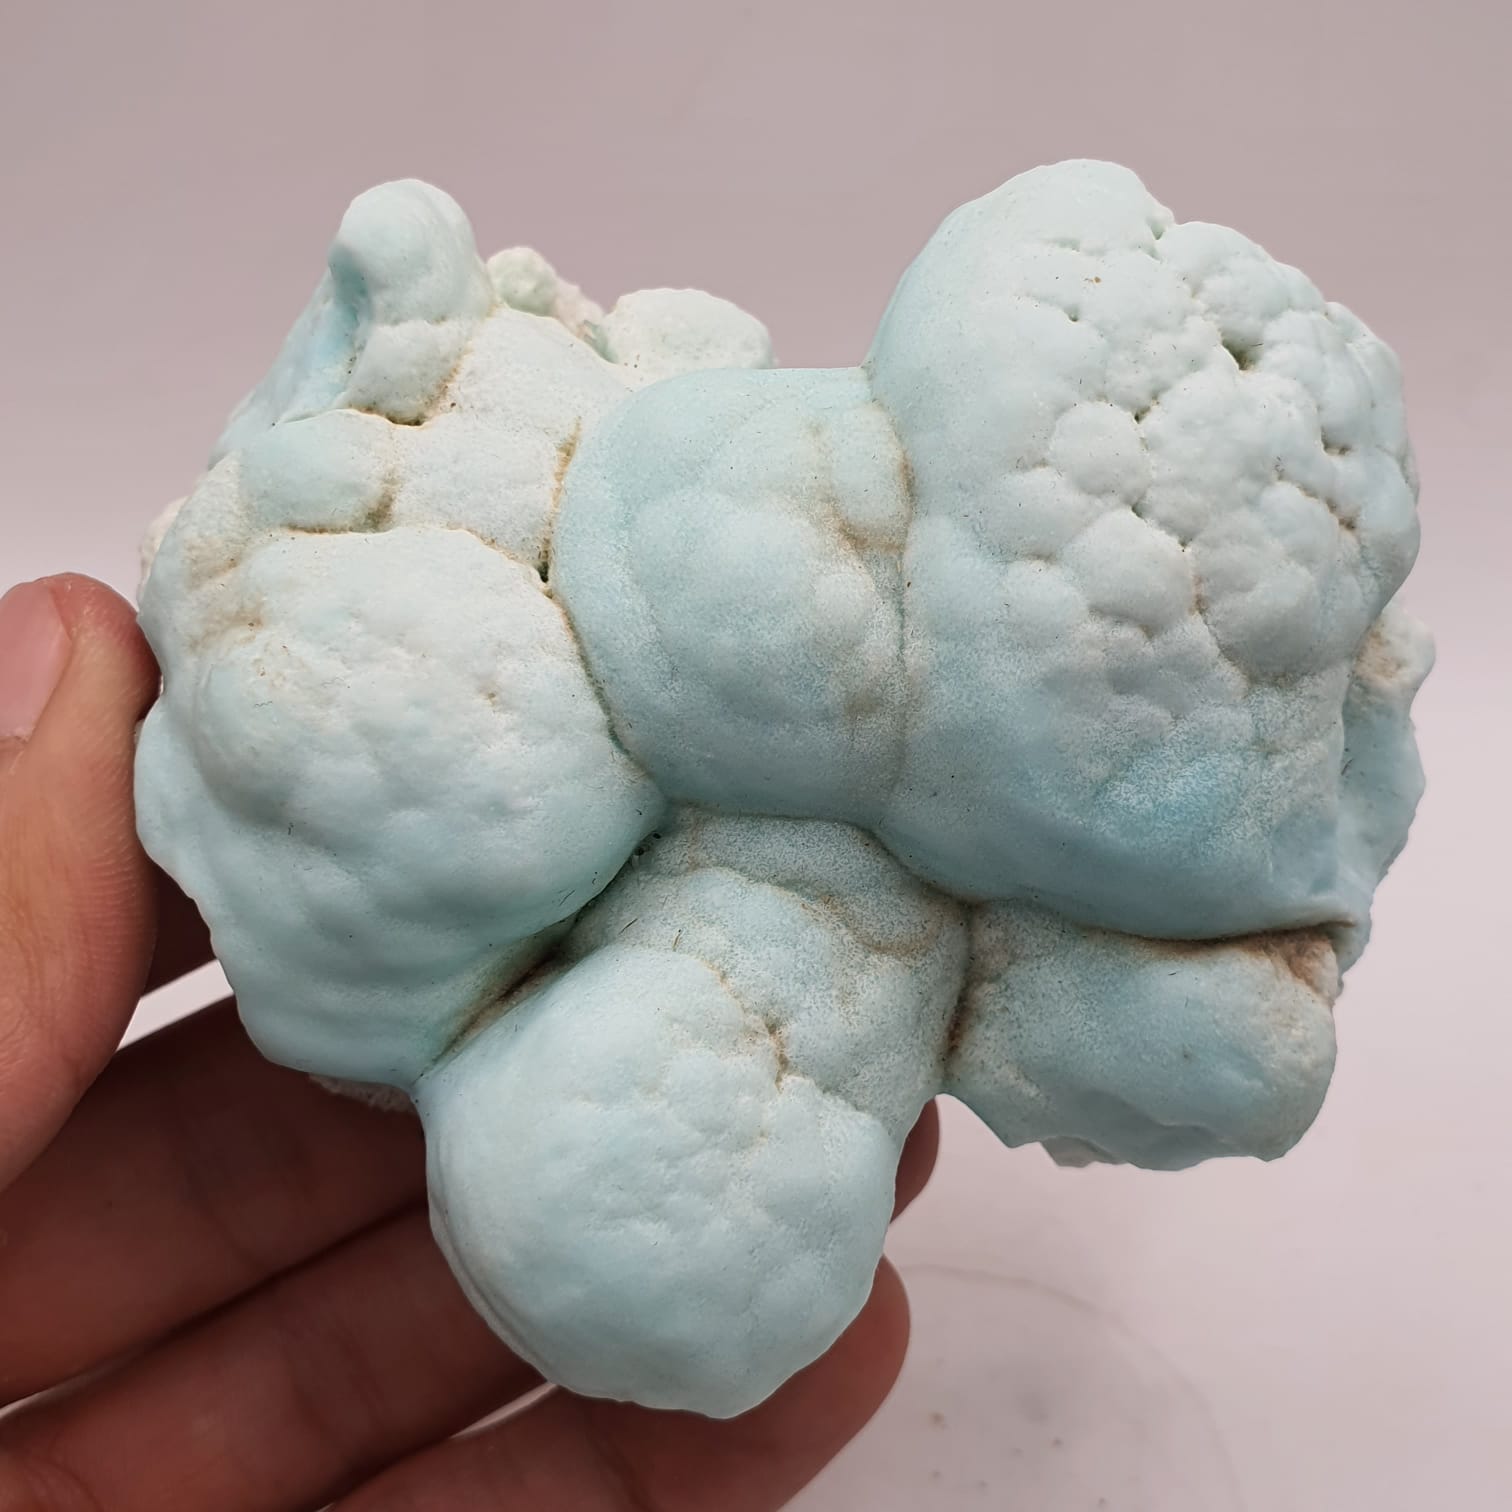 Lovely Botryoidal Aggregate Of Blue Aragonite